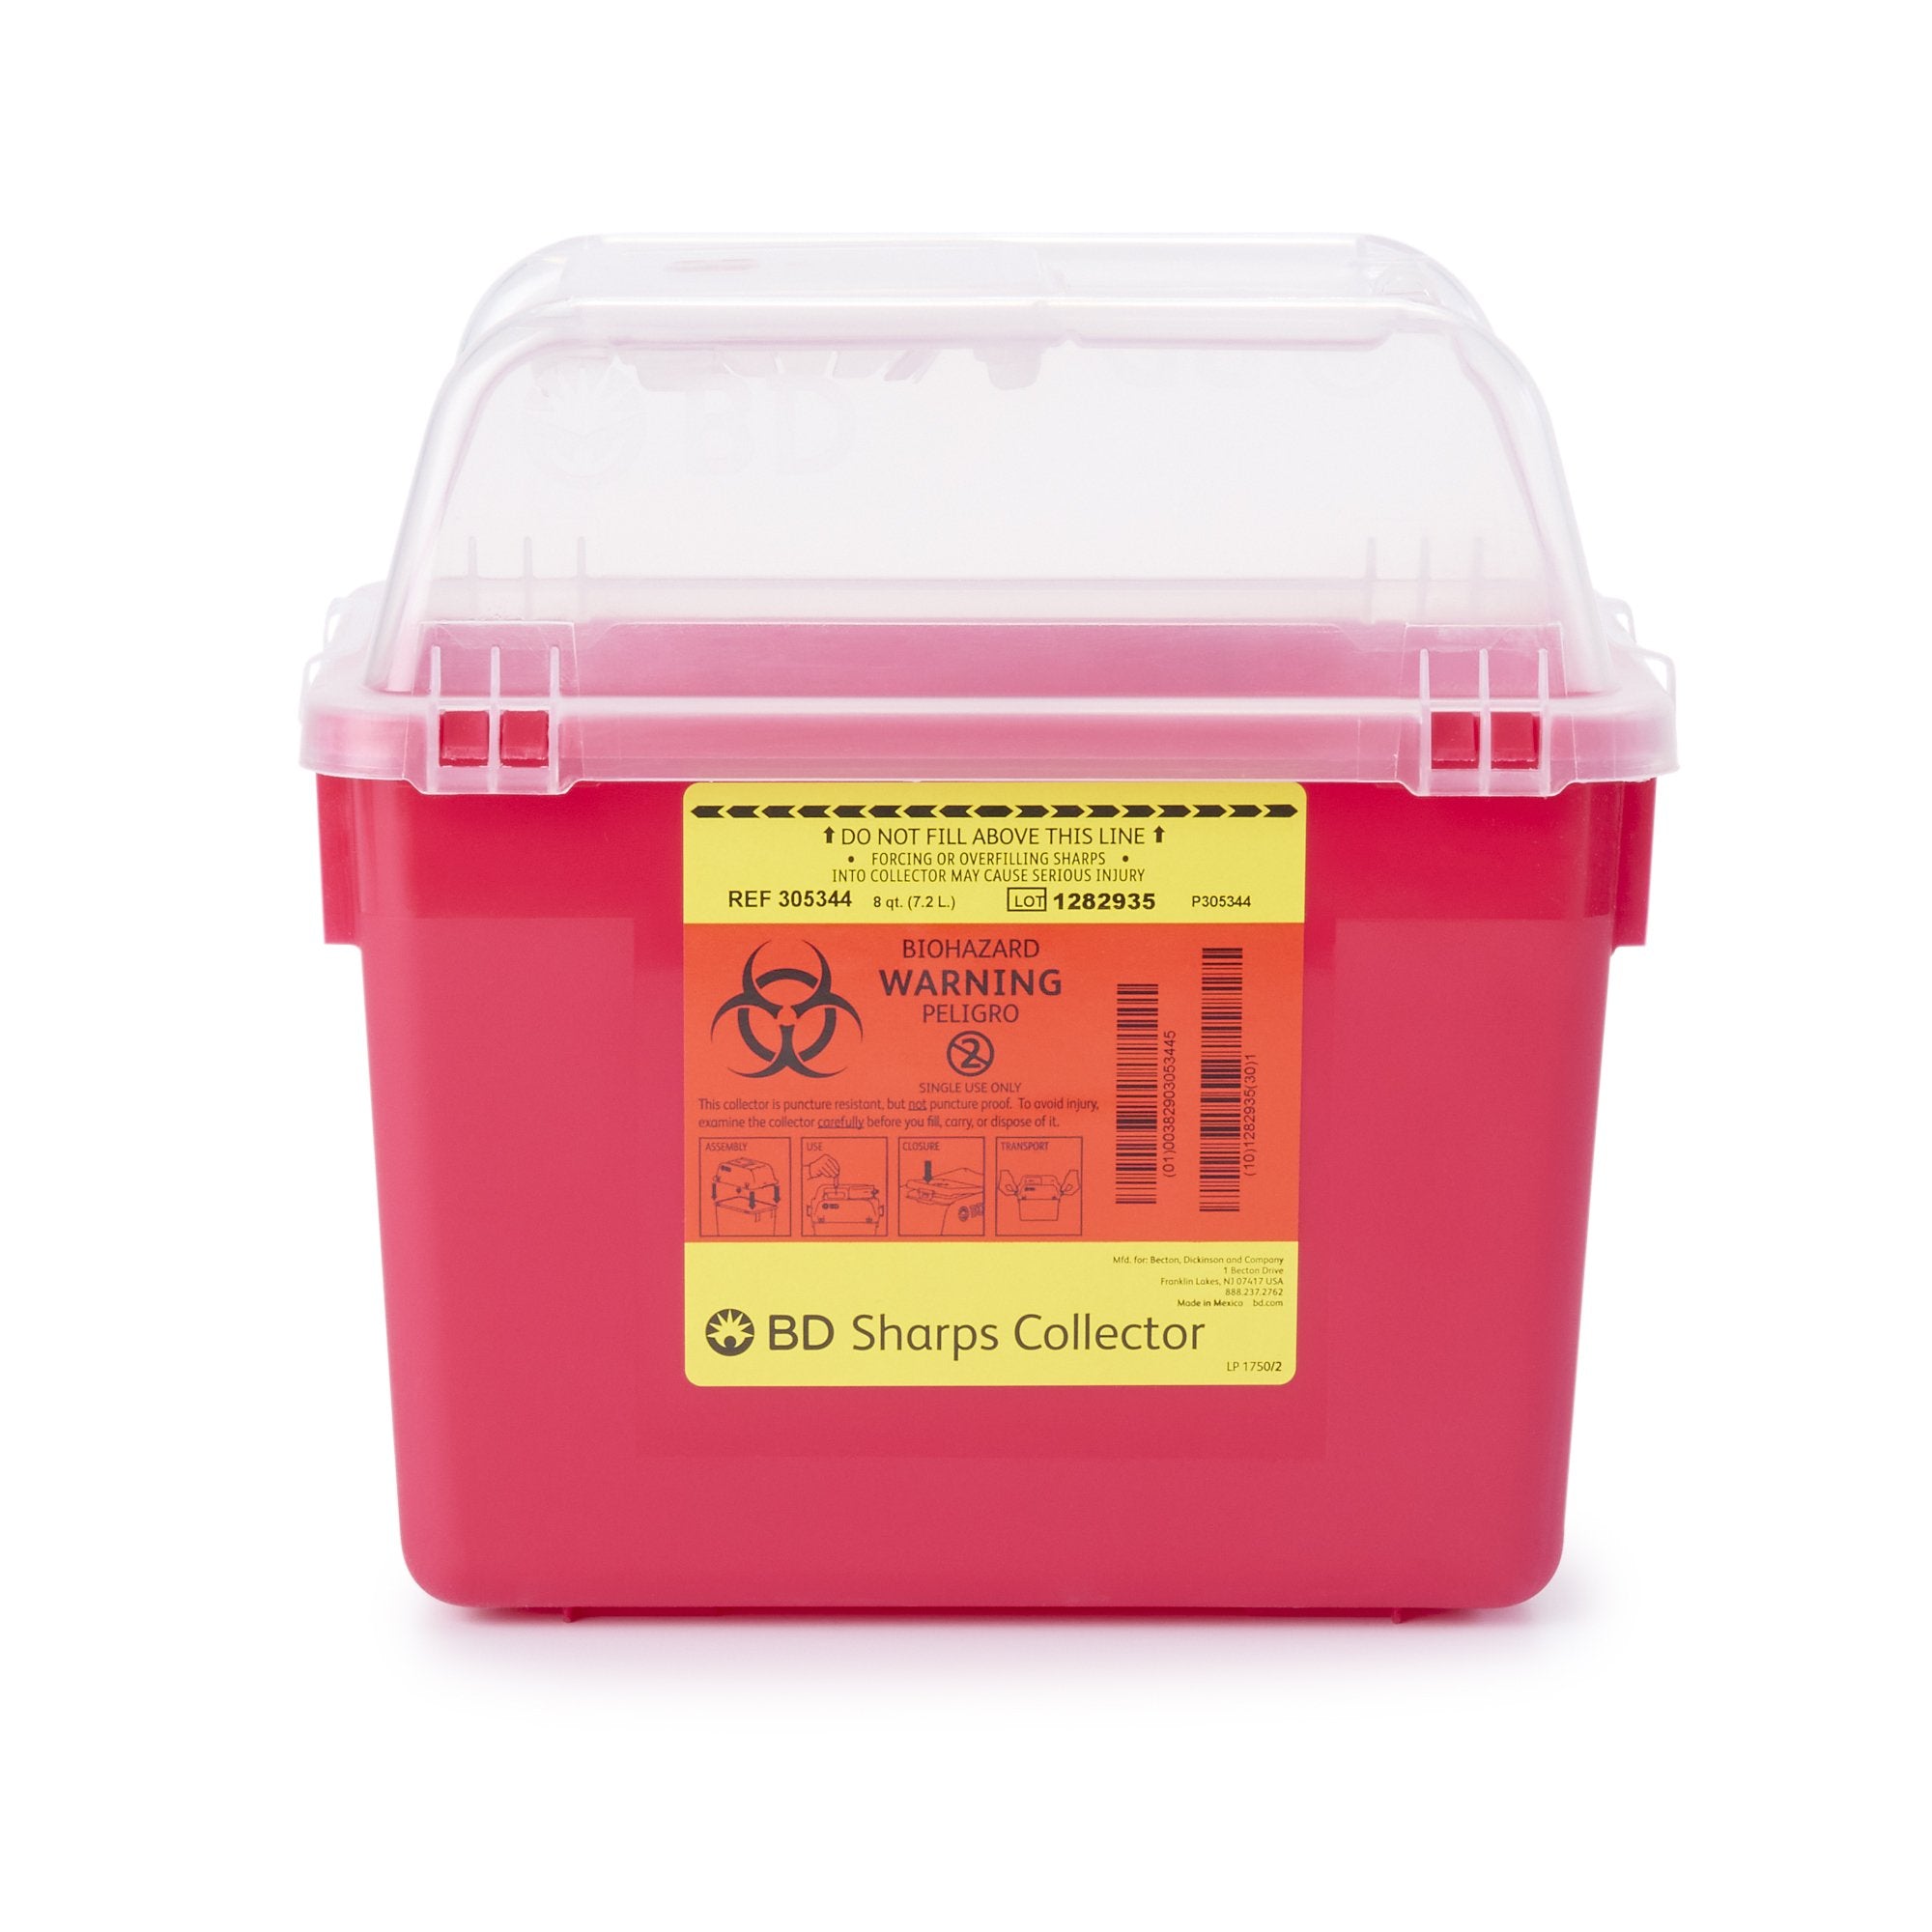 Sharps Container BD™ Red Base 26 X 29 X 17 cm Vertical Entry 2 Gallon